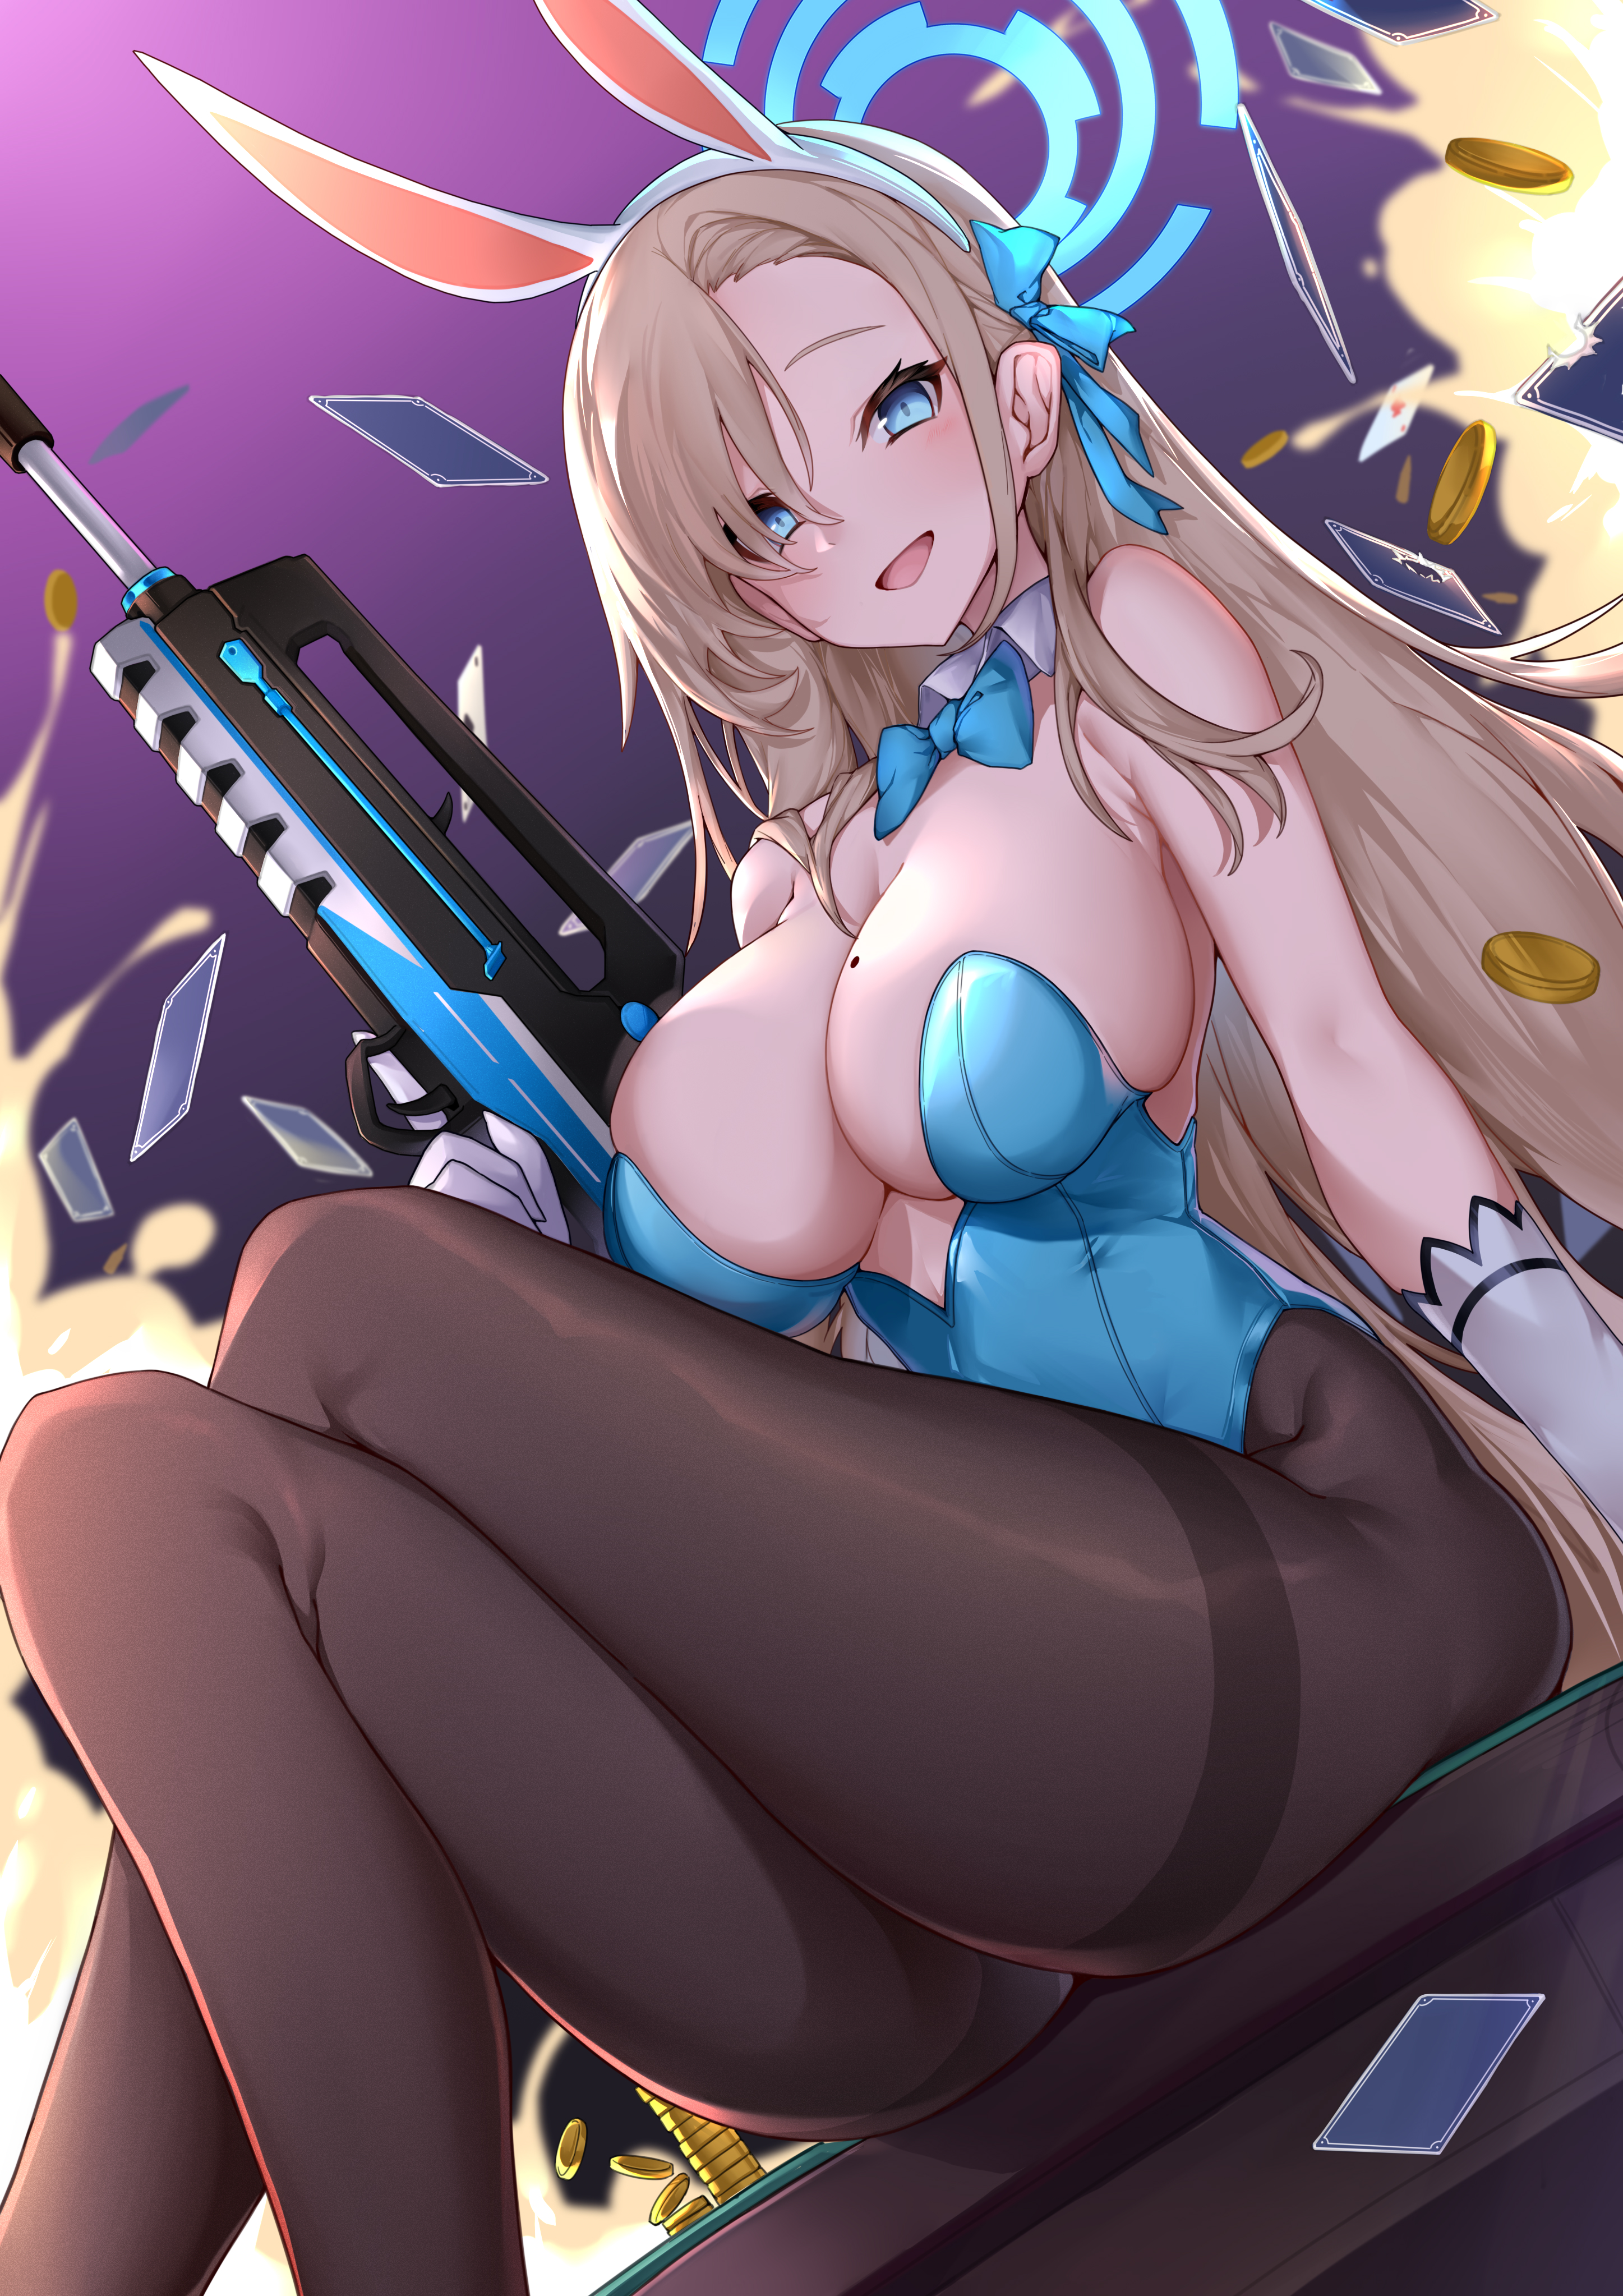 Anime 2894x4093 anime anime girls bunny suit bunny ears bunny girl big boobs gun girls with guns pantyhose blue eyes cards blonde Asuna Ichinose weapon blue leotard legs crossed low-angle gold coins mole on breast portrait display